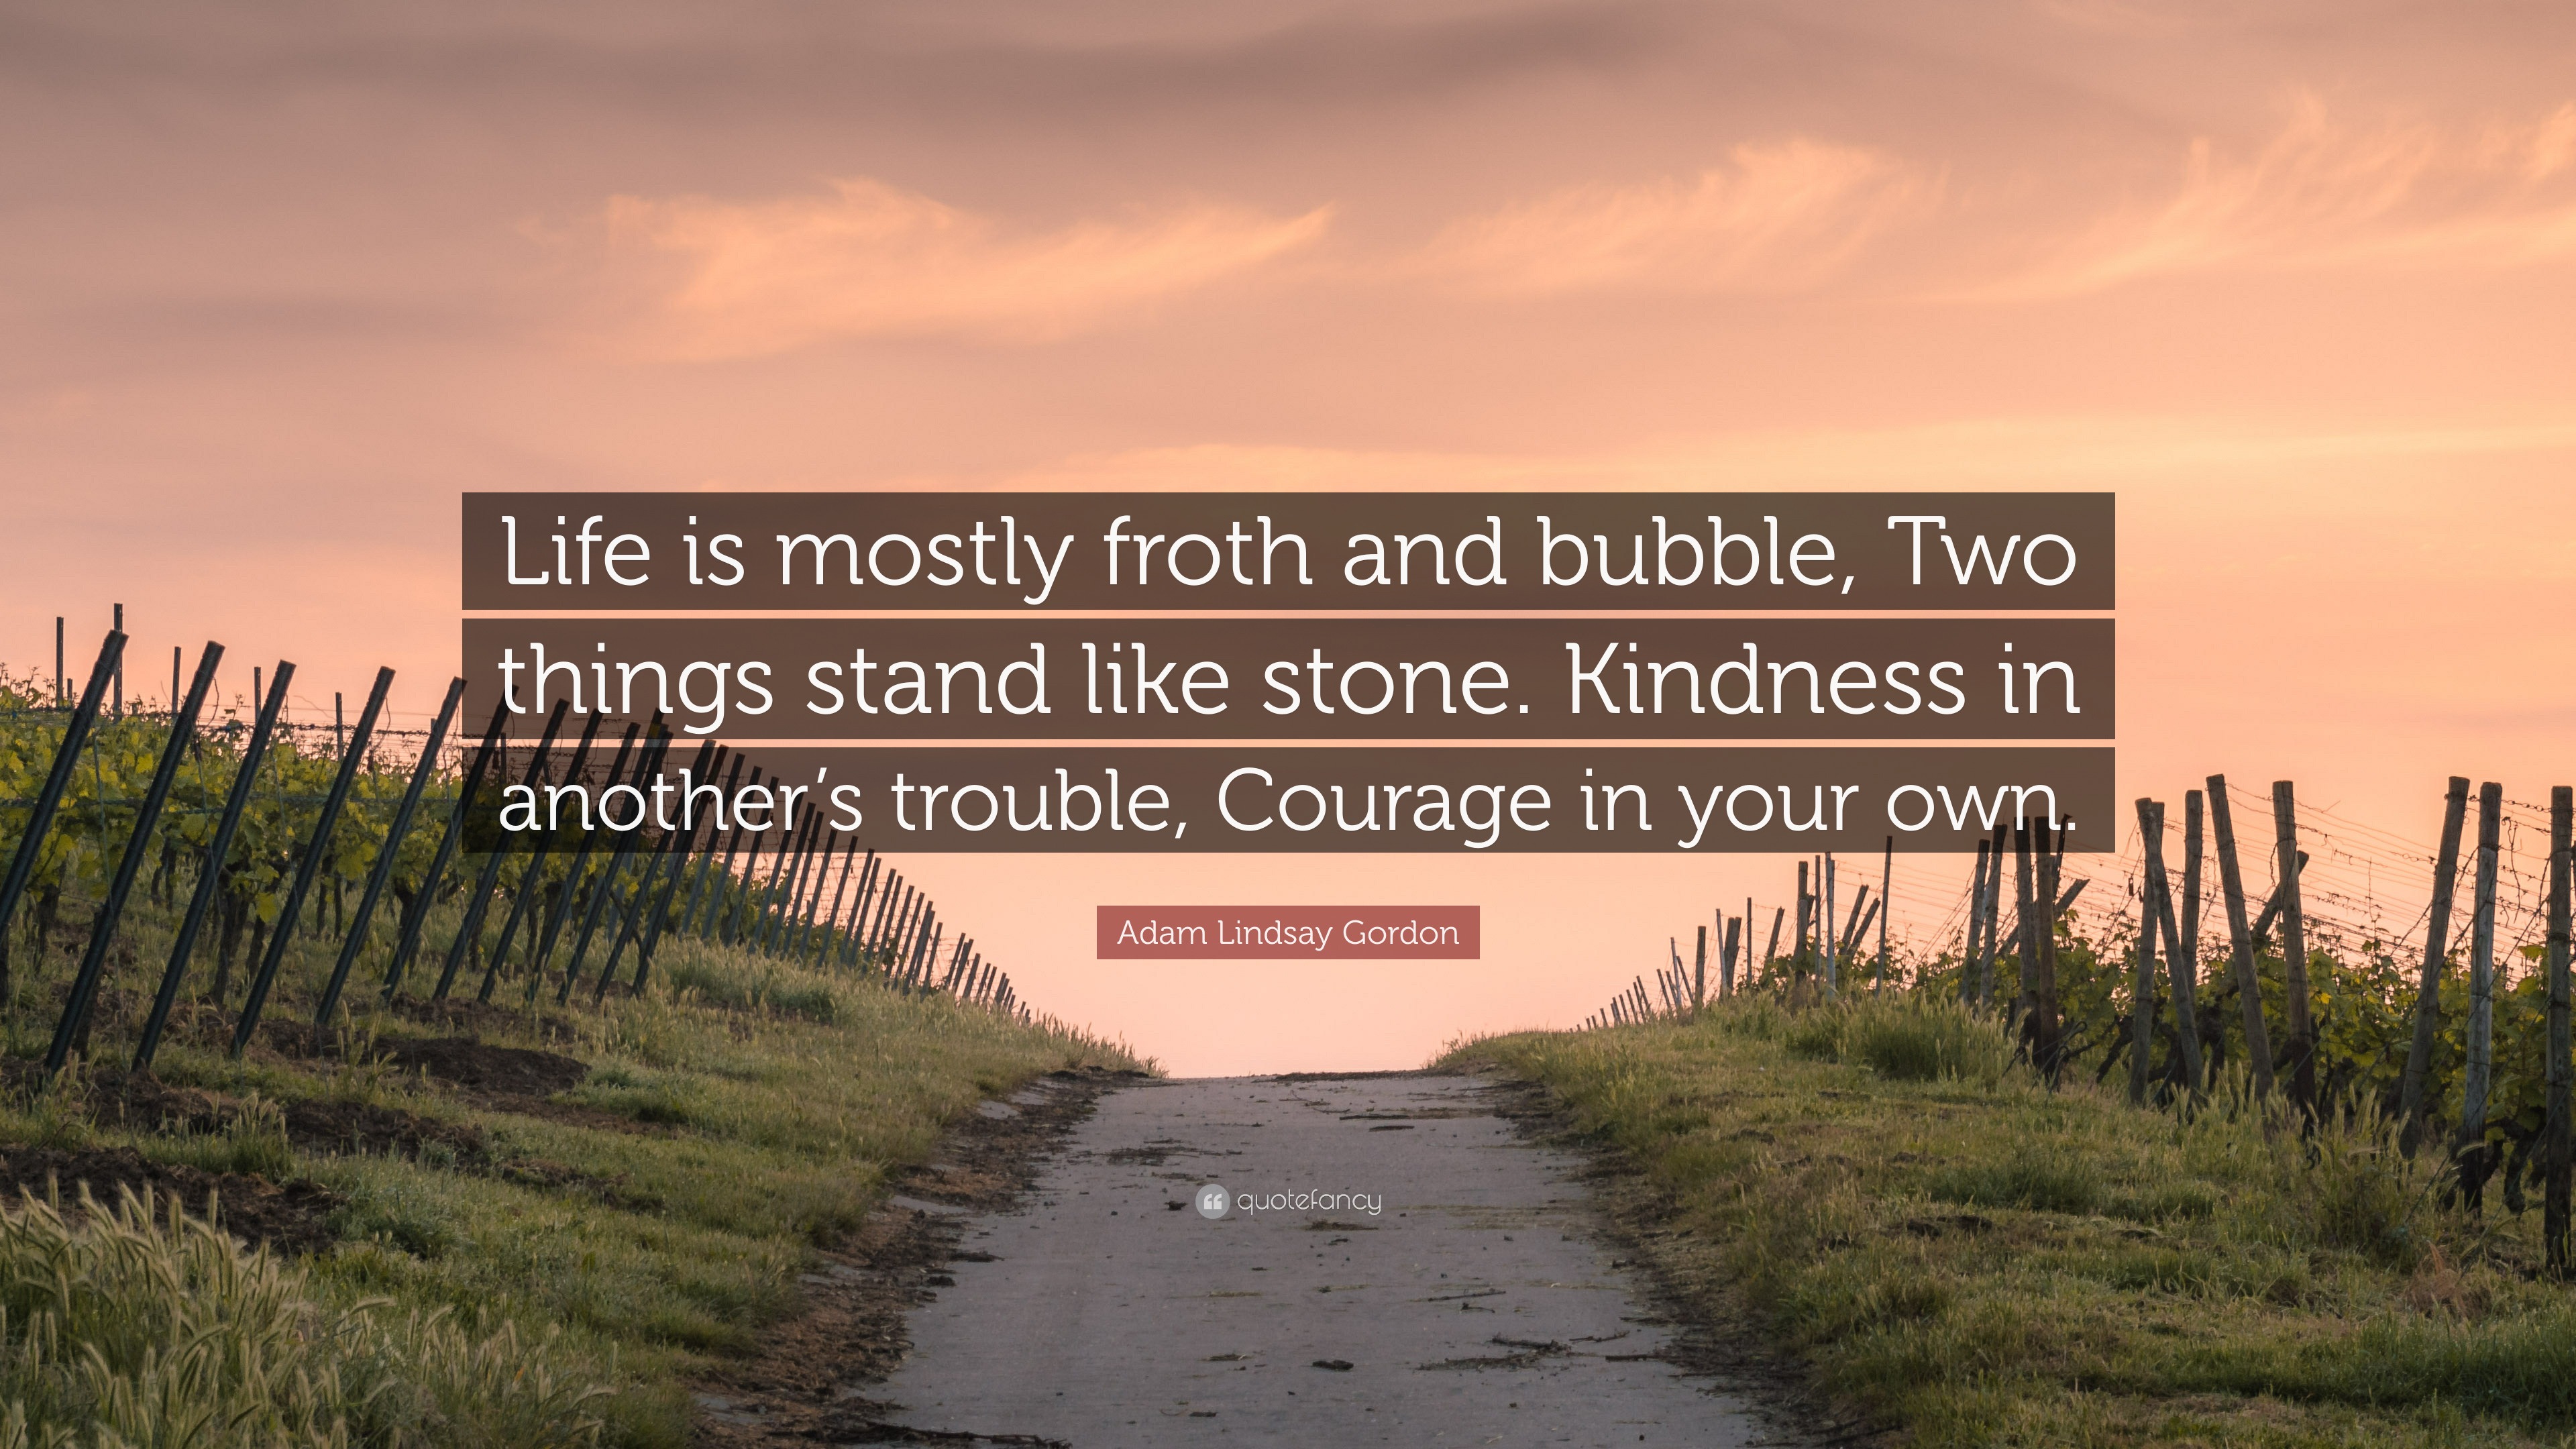 Adam Lindsay Gordon Quote Life Is Mostly Froth And Bubble Two Things Stand Like Stone Kindness